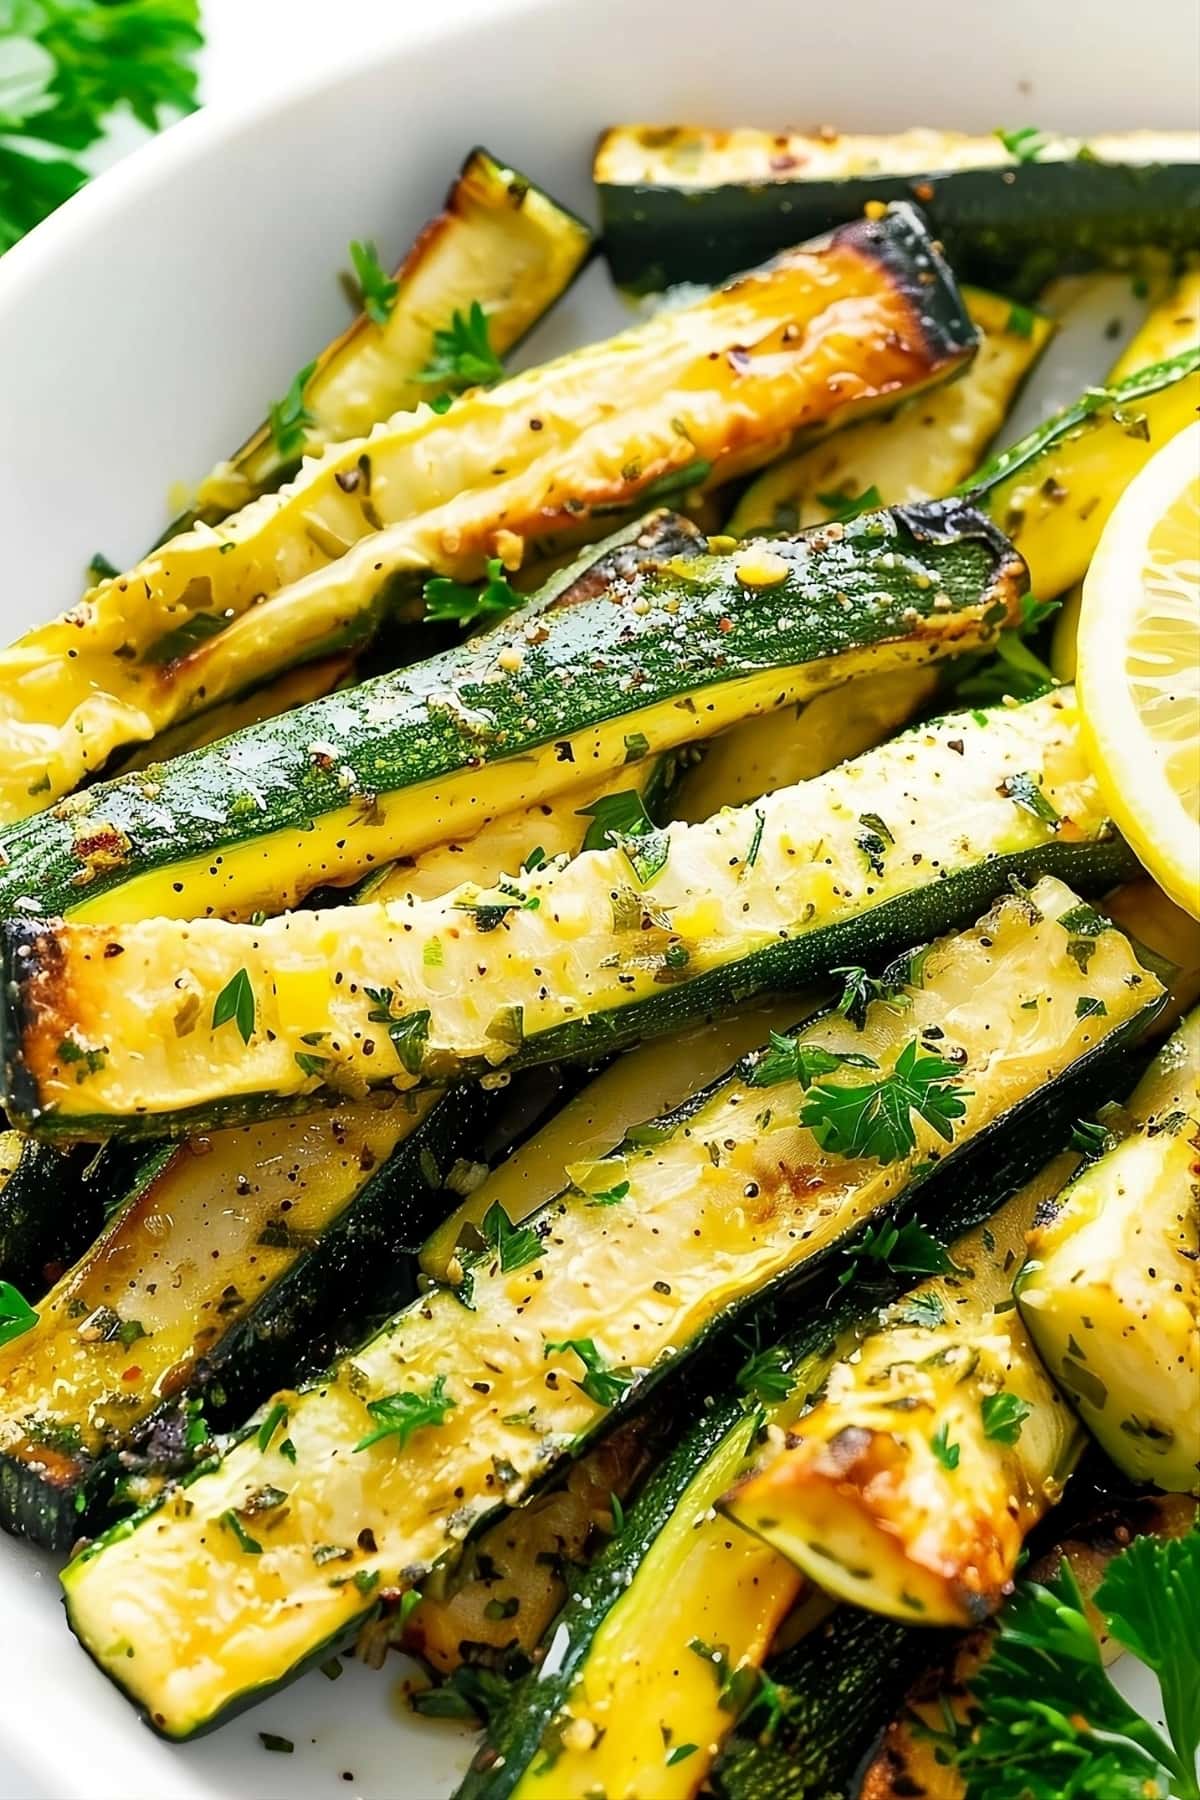 Roasted zucchini served on a white plate with chopped parsley and lemon on side.